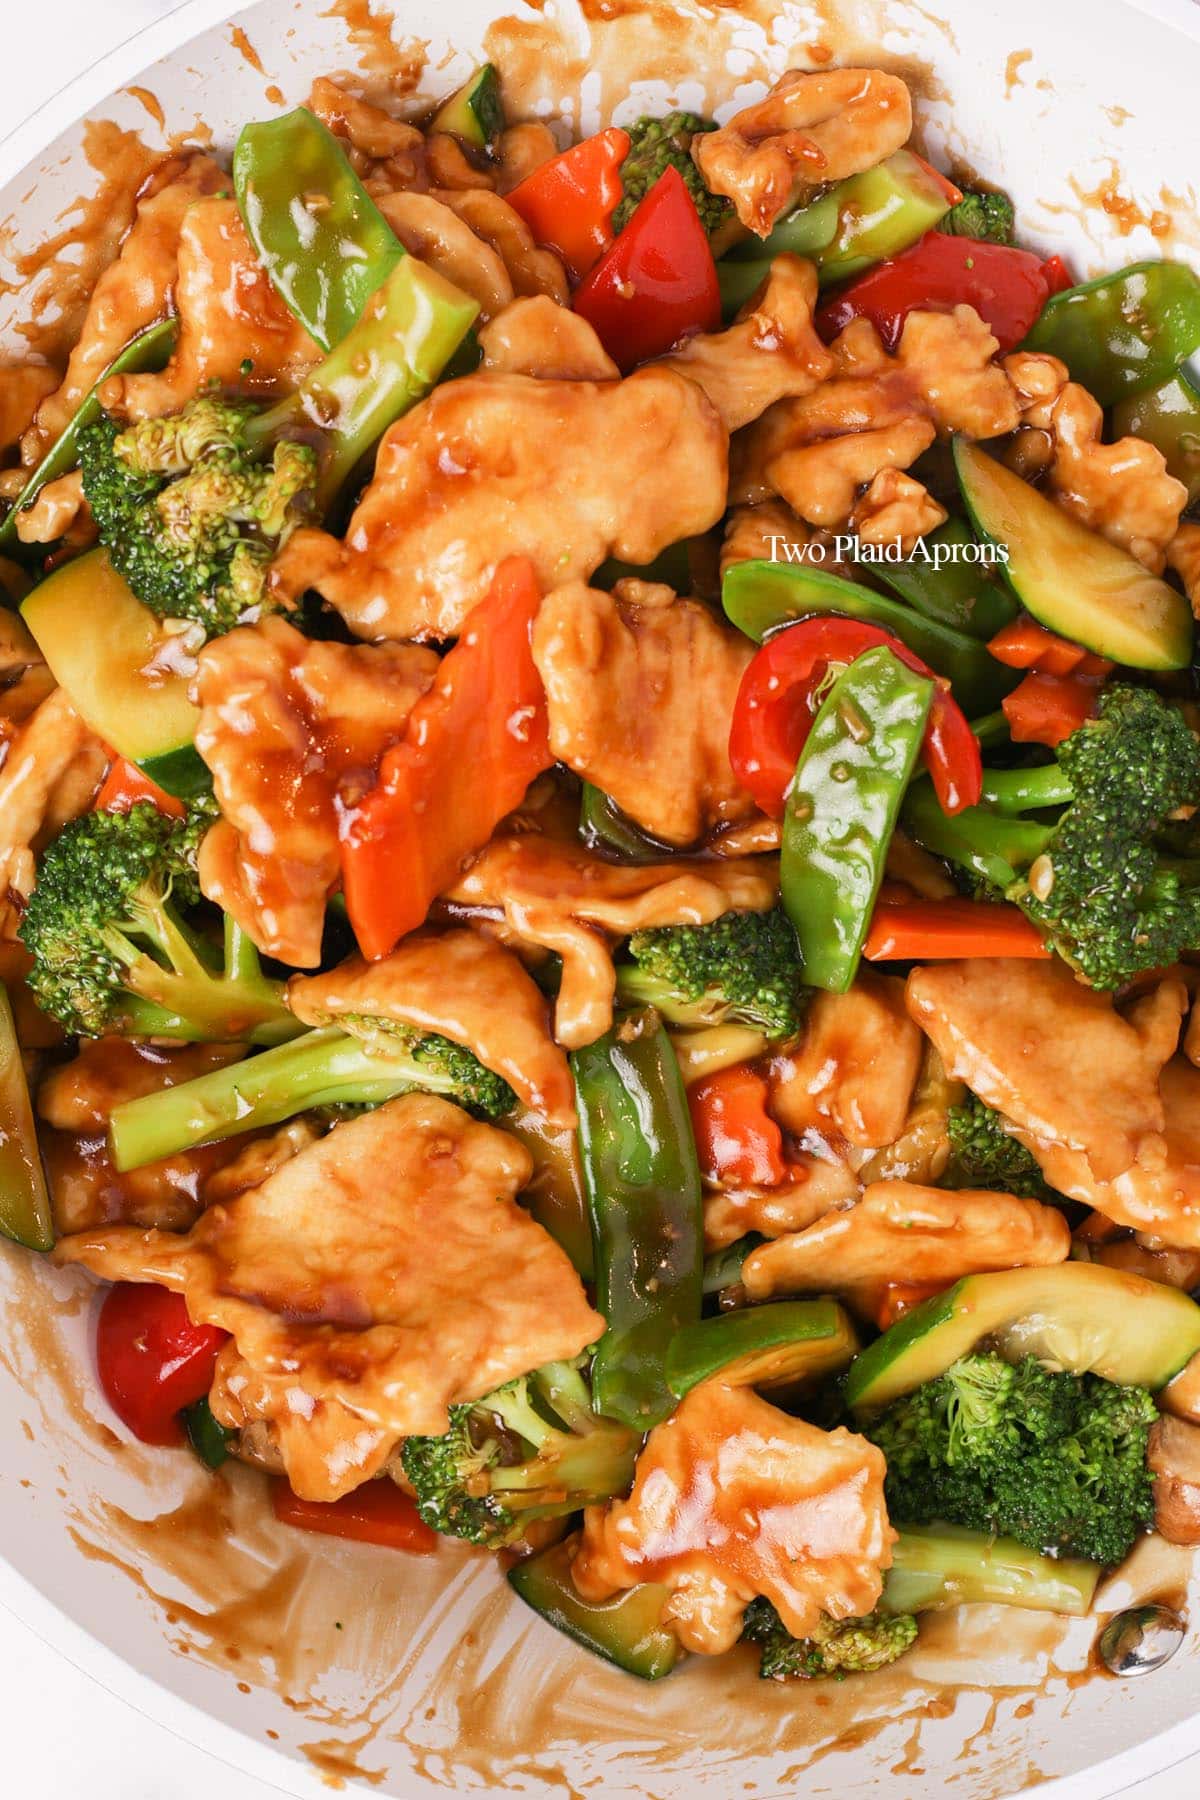 Pan with finishes chicken mixed vegetable stir fry.